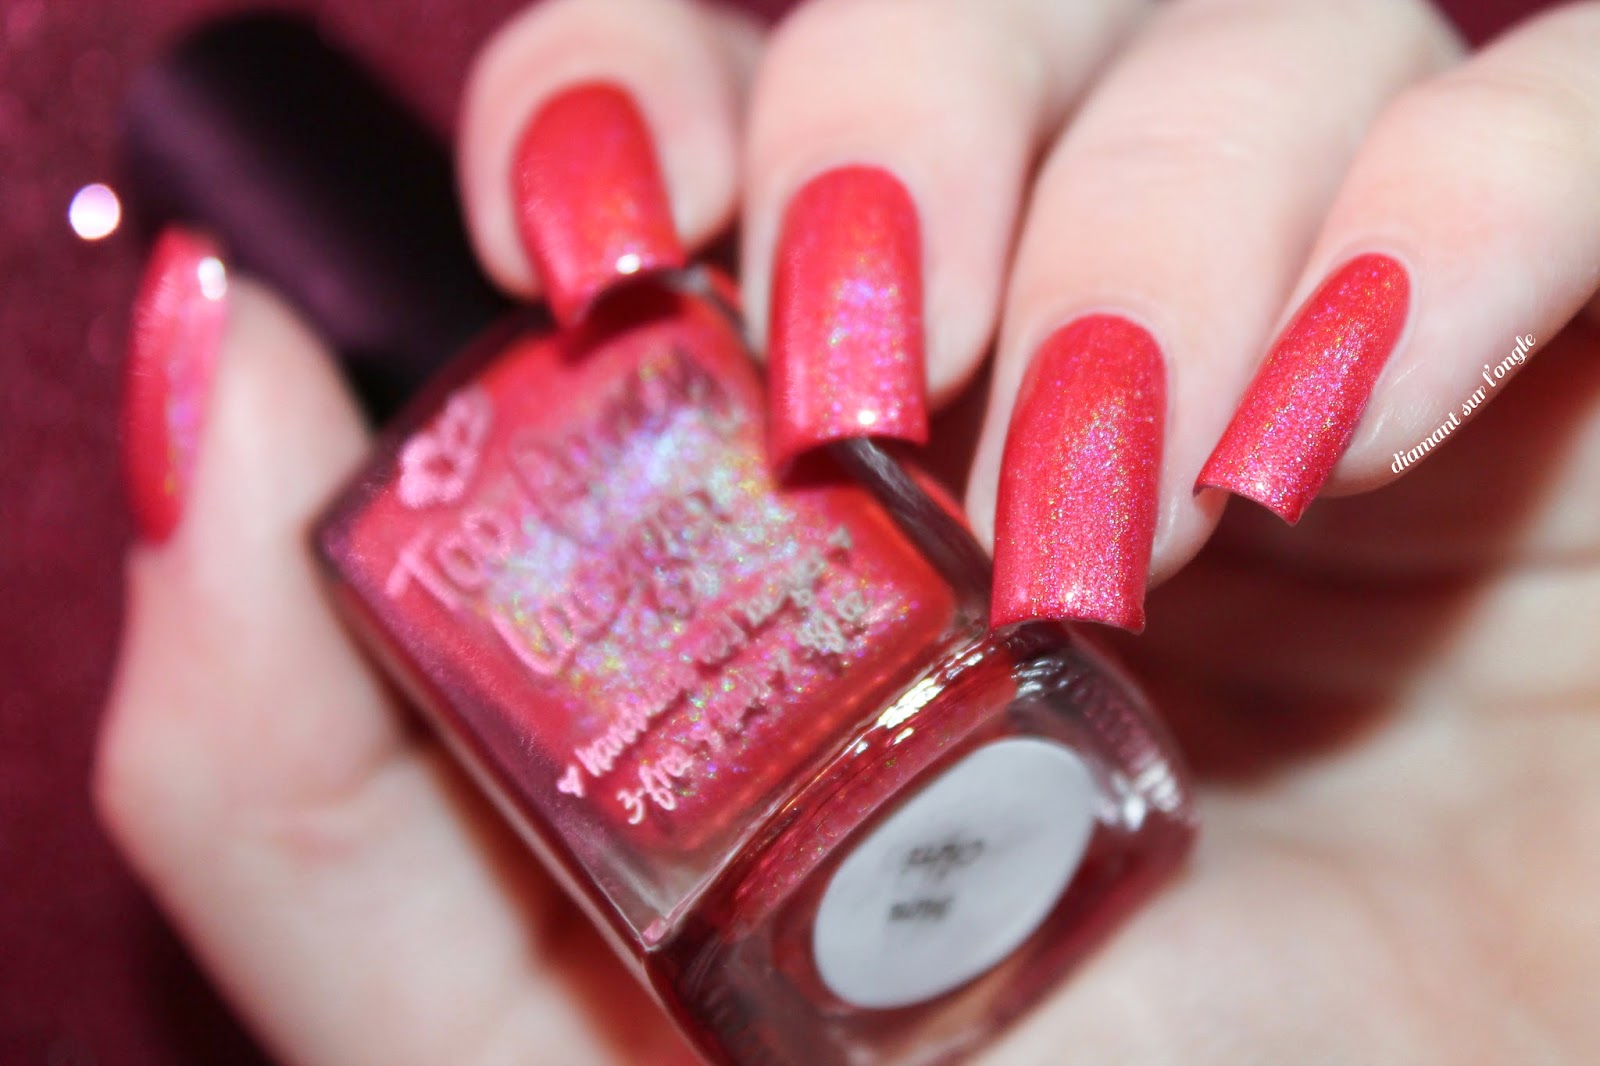 Swatch of "Mon Chéri" from Too Fancy Lacquer